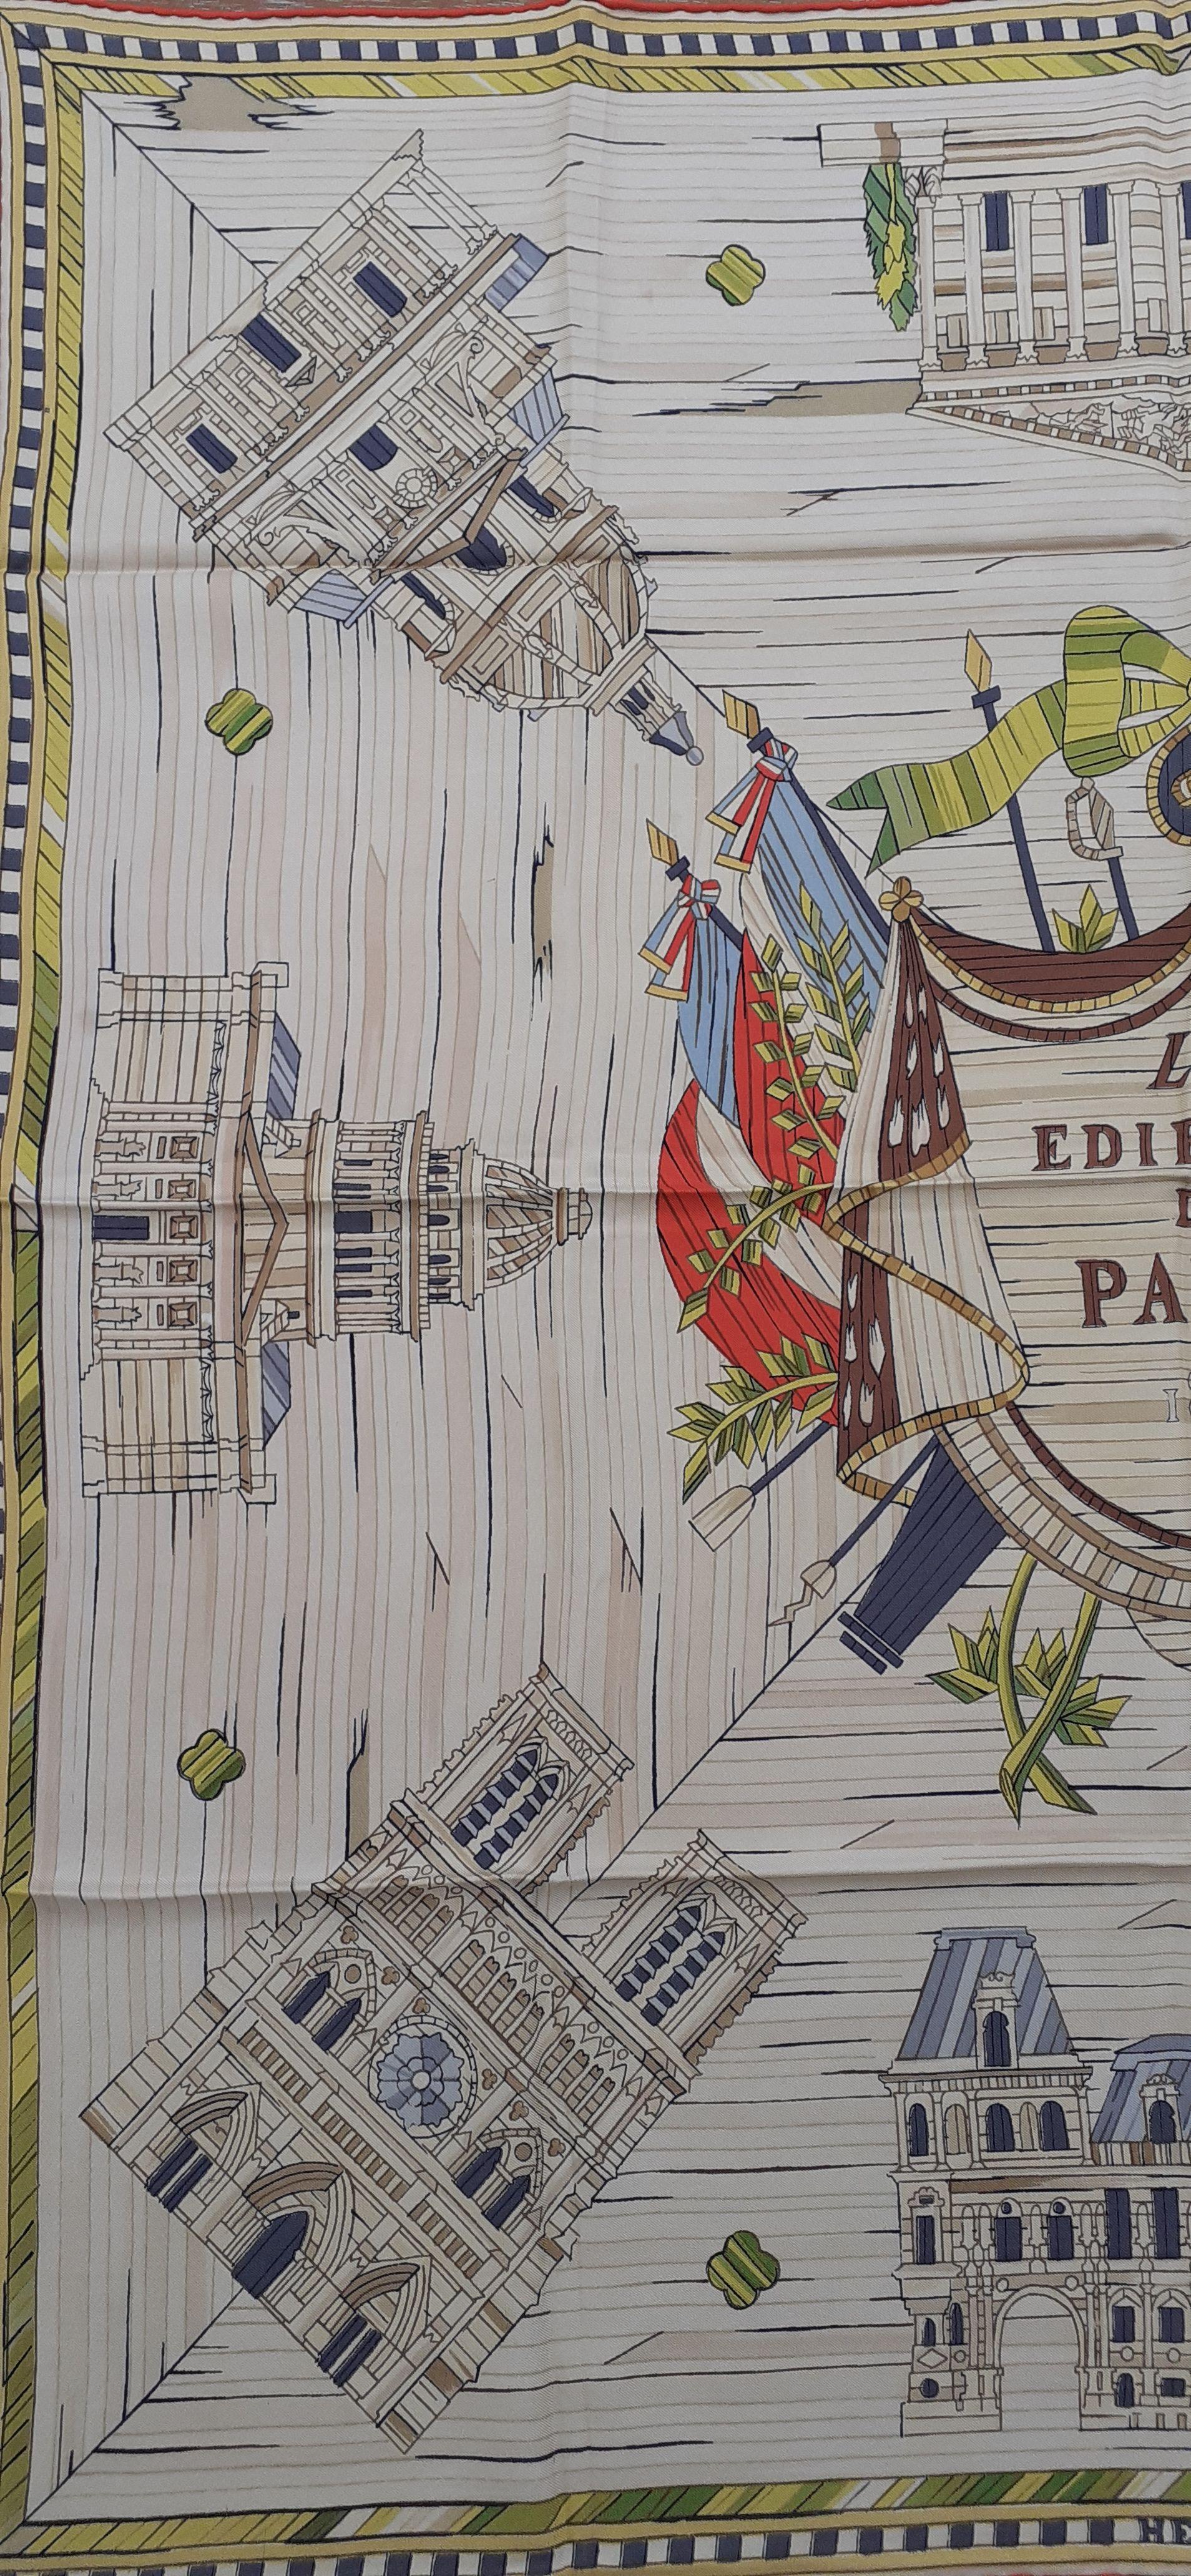 Rare opportunity to get this stunning authentic Hermès scarf
 
Print: 